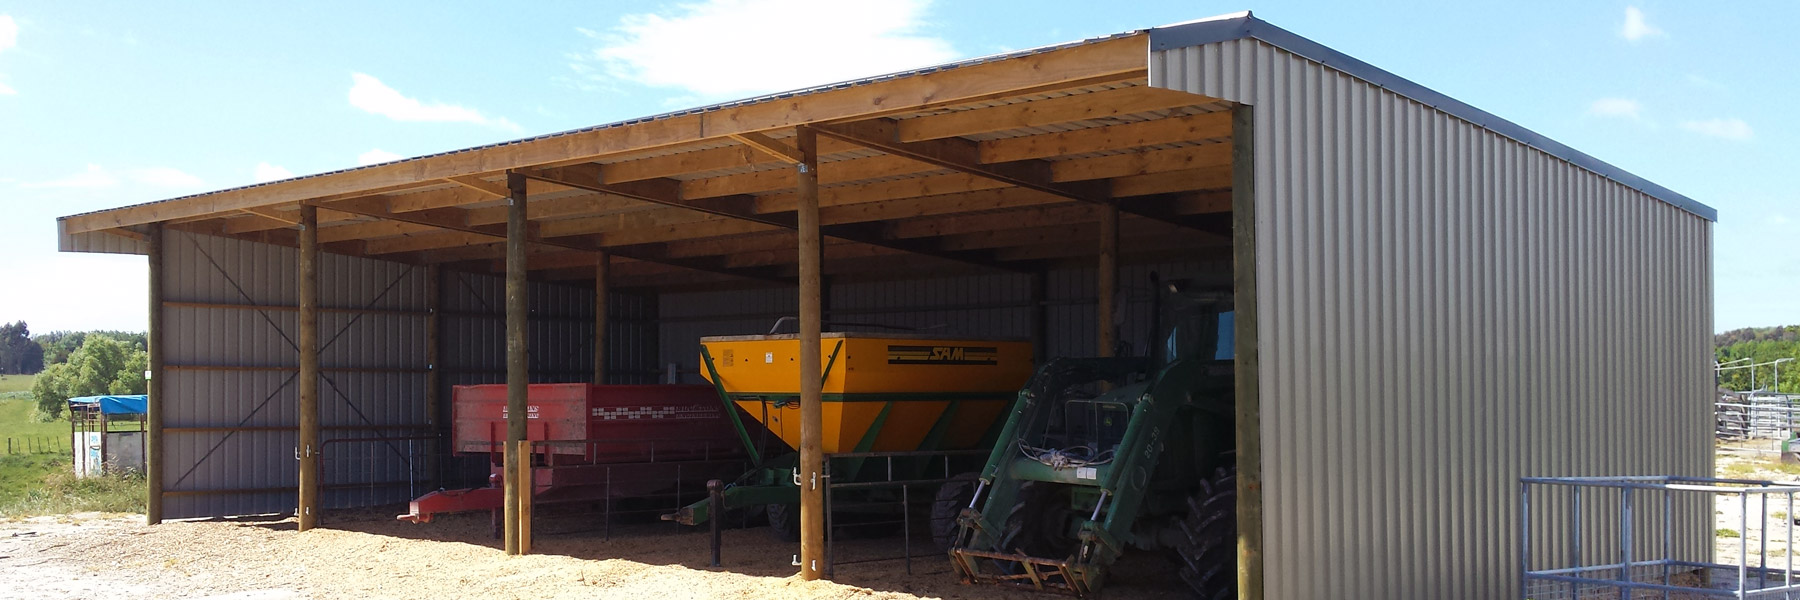 Machinery Sheds - CPS Services